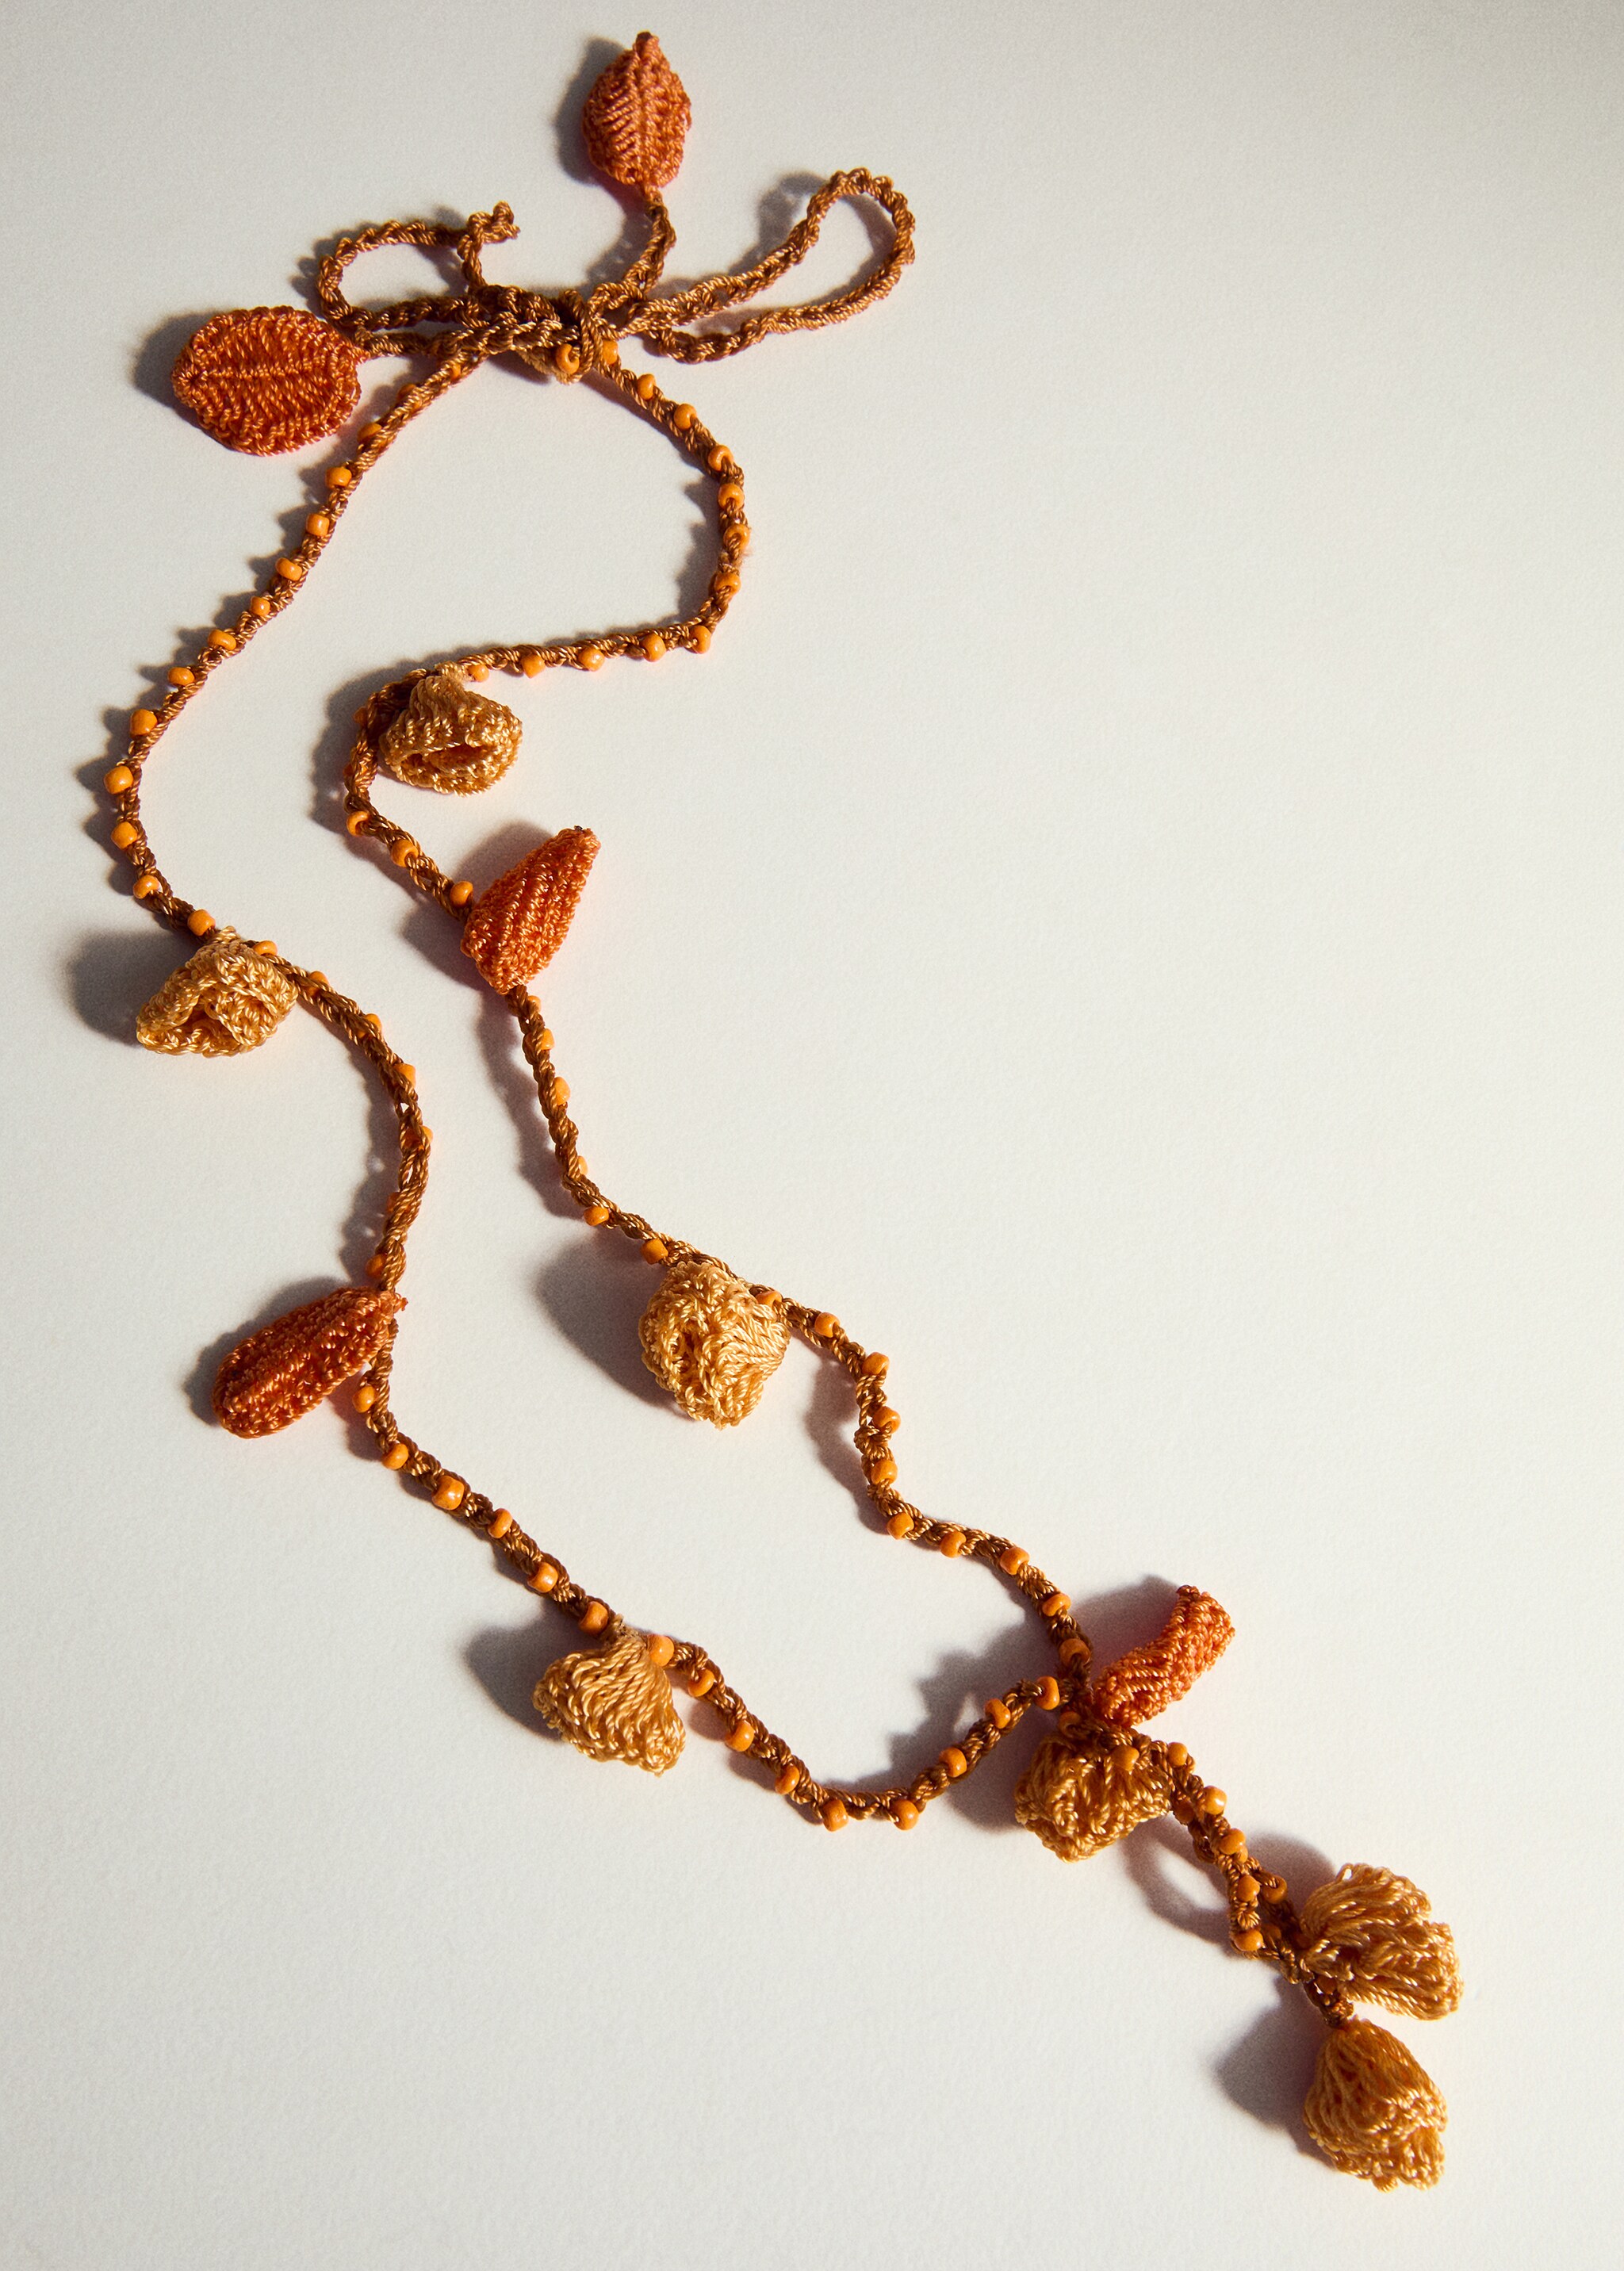 Crochet bead necklace - Details of the article 5